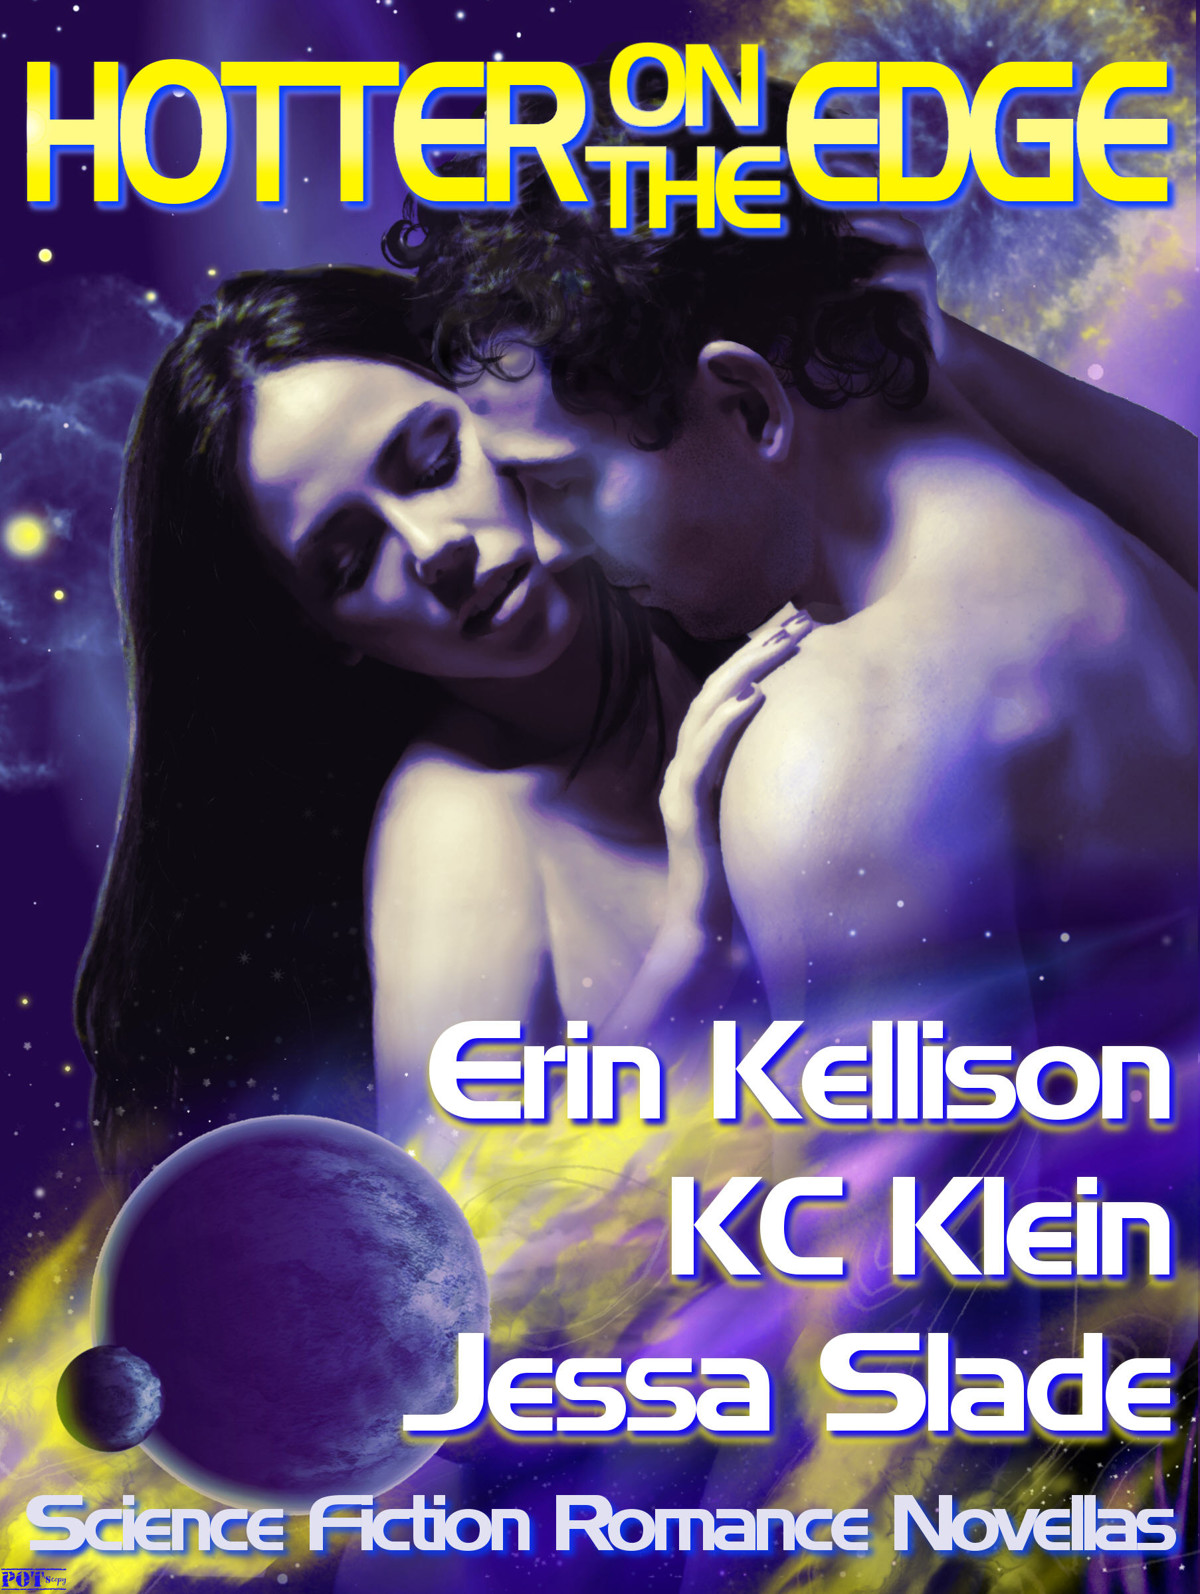 Hotter on the Edge by Erin Kellison